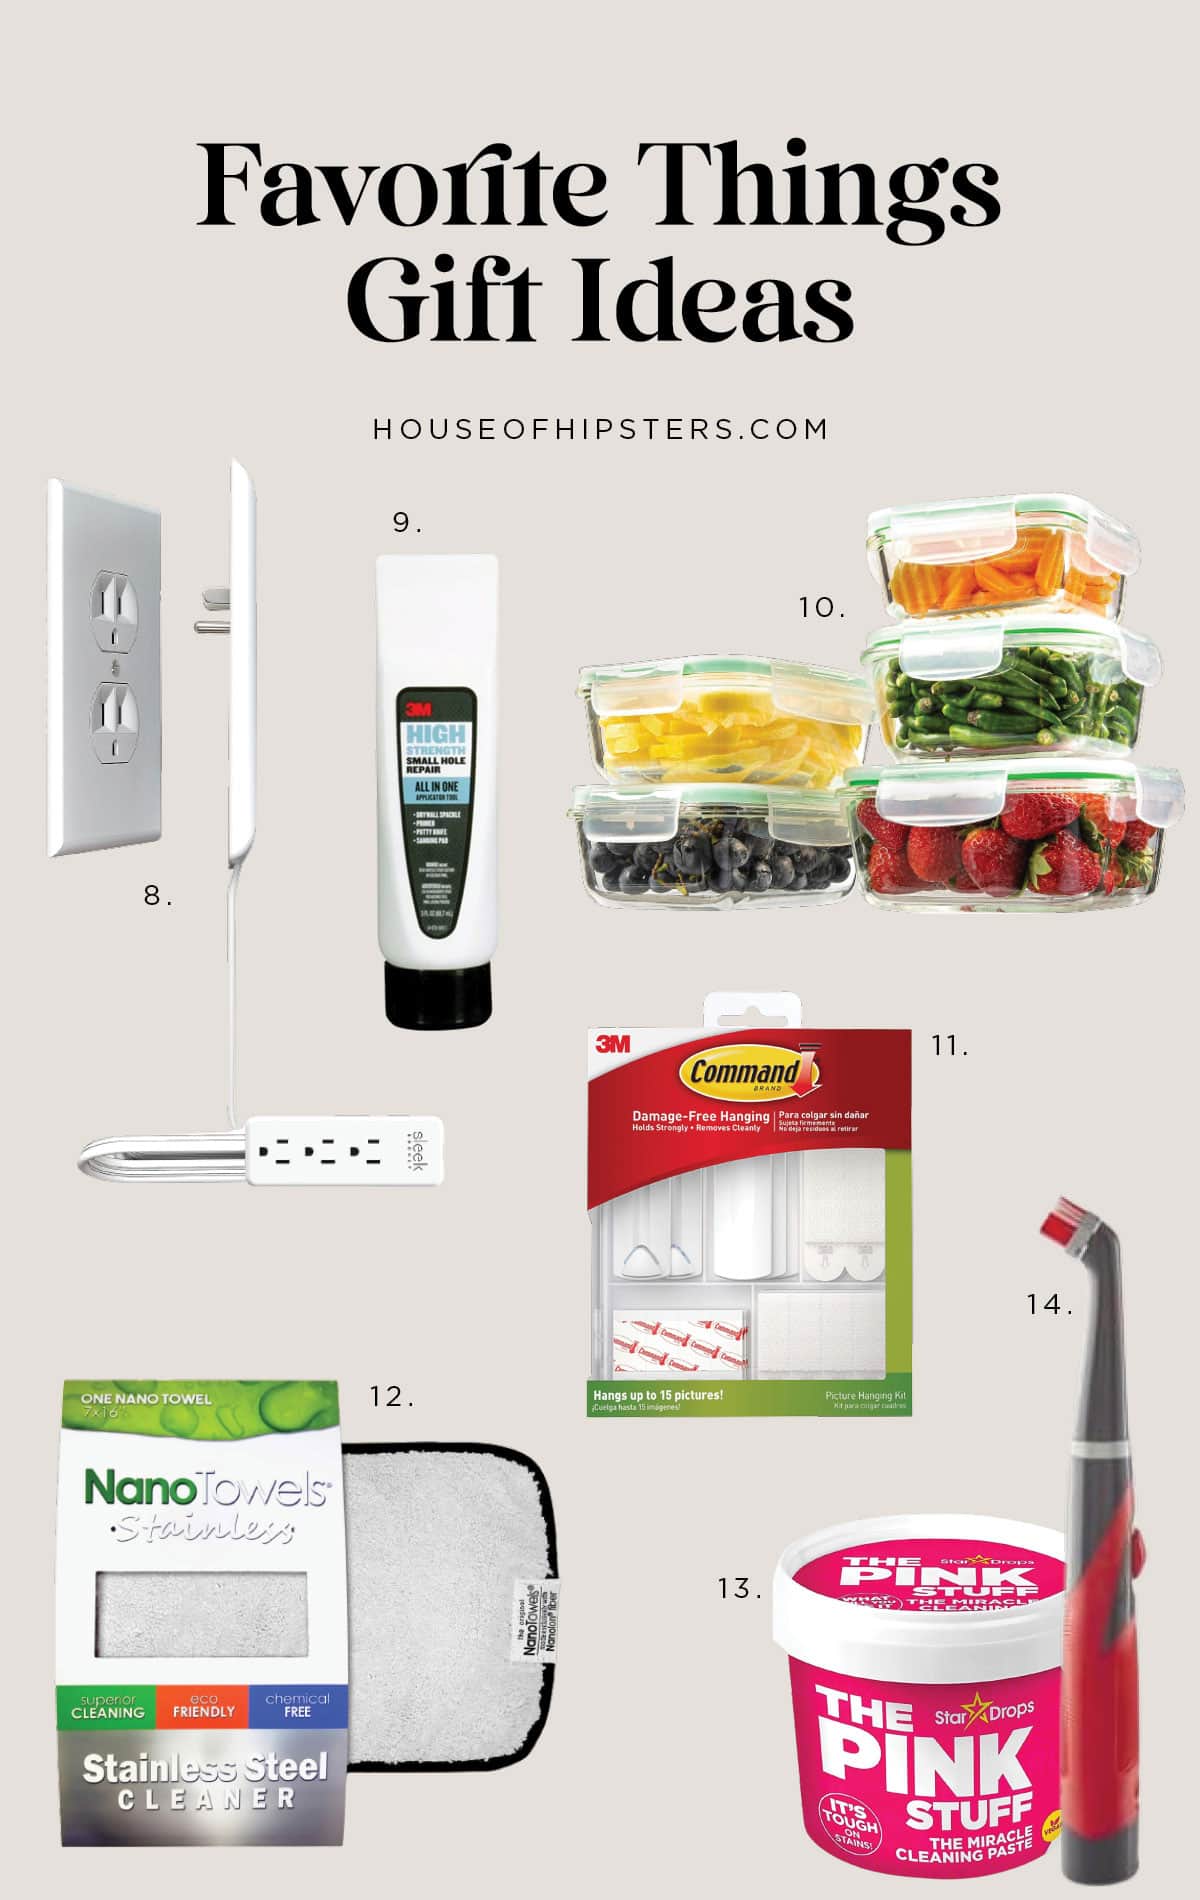 Favorite Things Party Gift Ideas - This section is all about favorite home gadgets from the best cleaning products to a handy outlet cover.